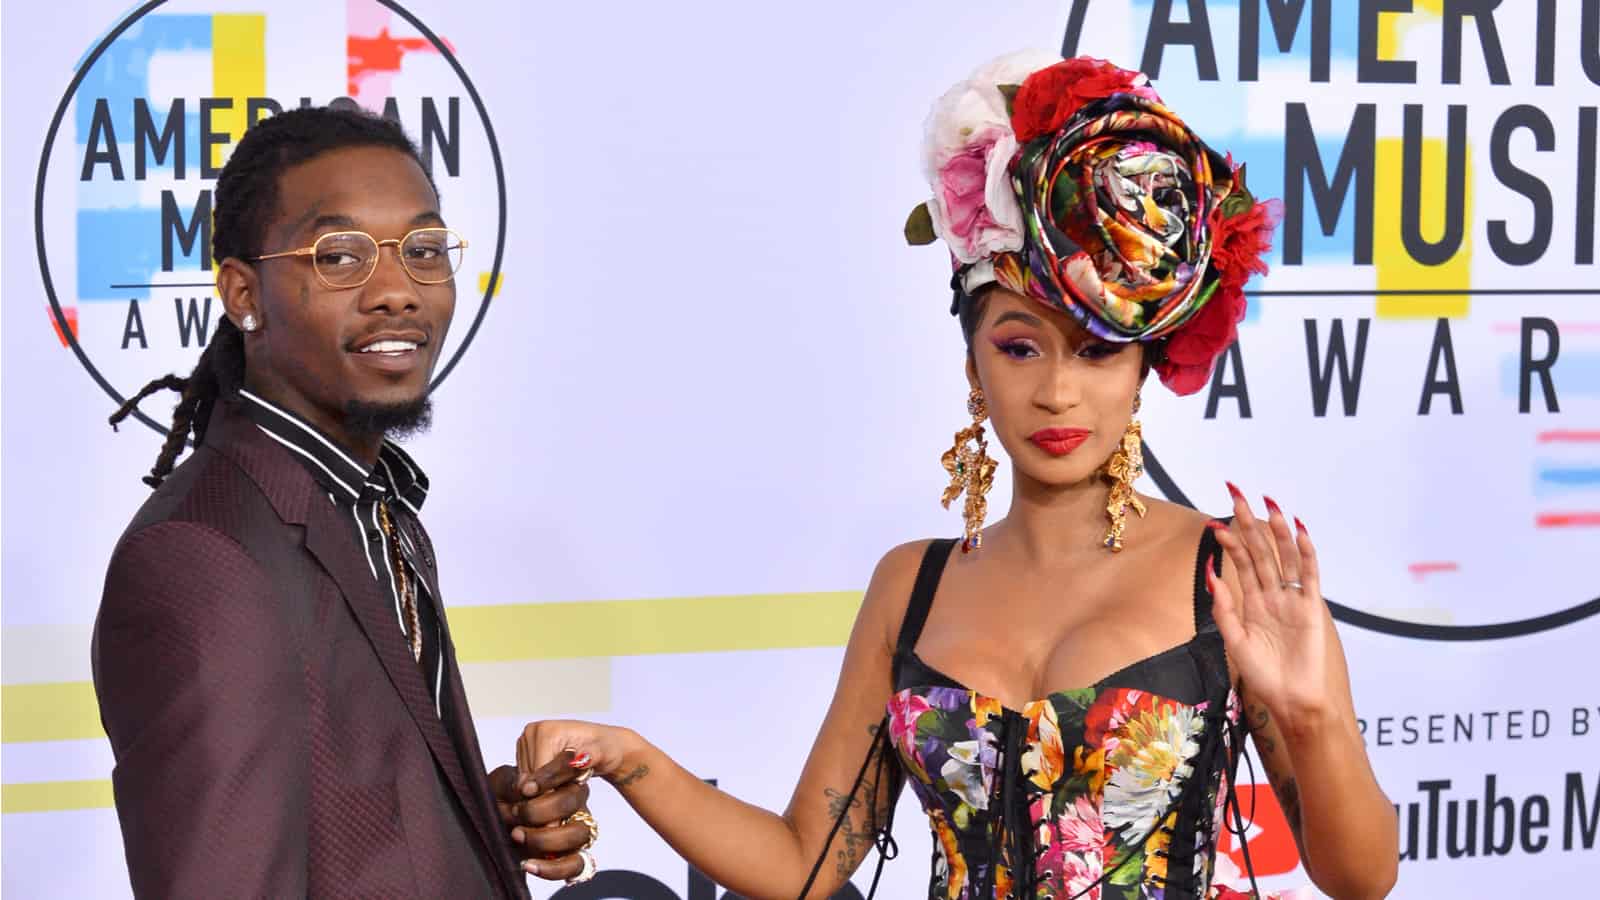 Report: Offset's Step Father Blames Cardi B For Exposing Family Issues